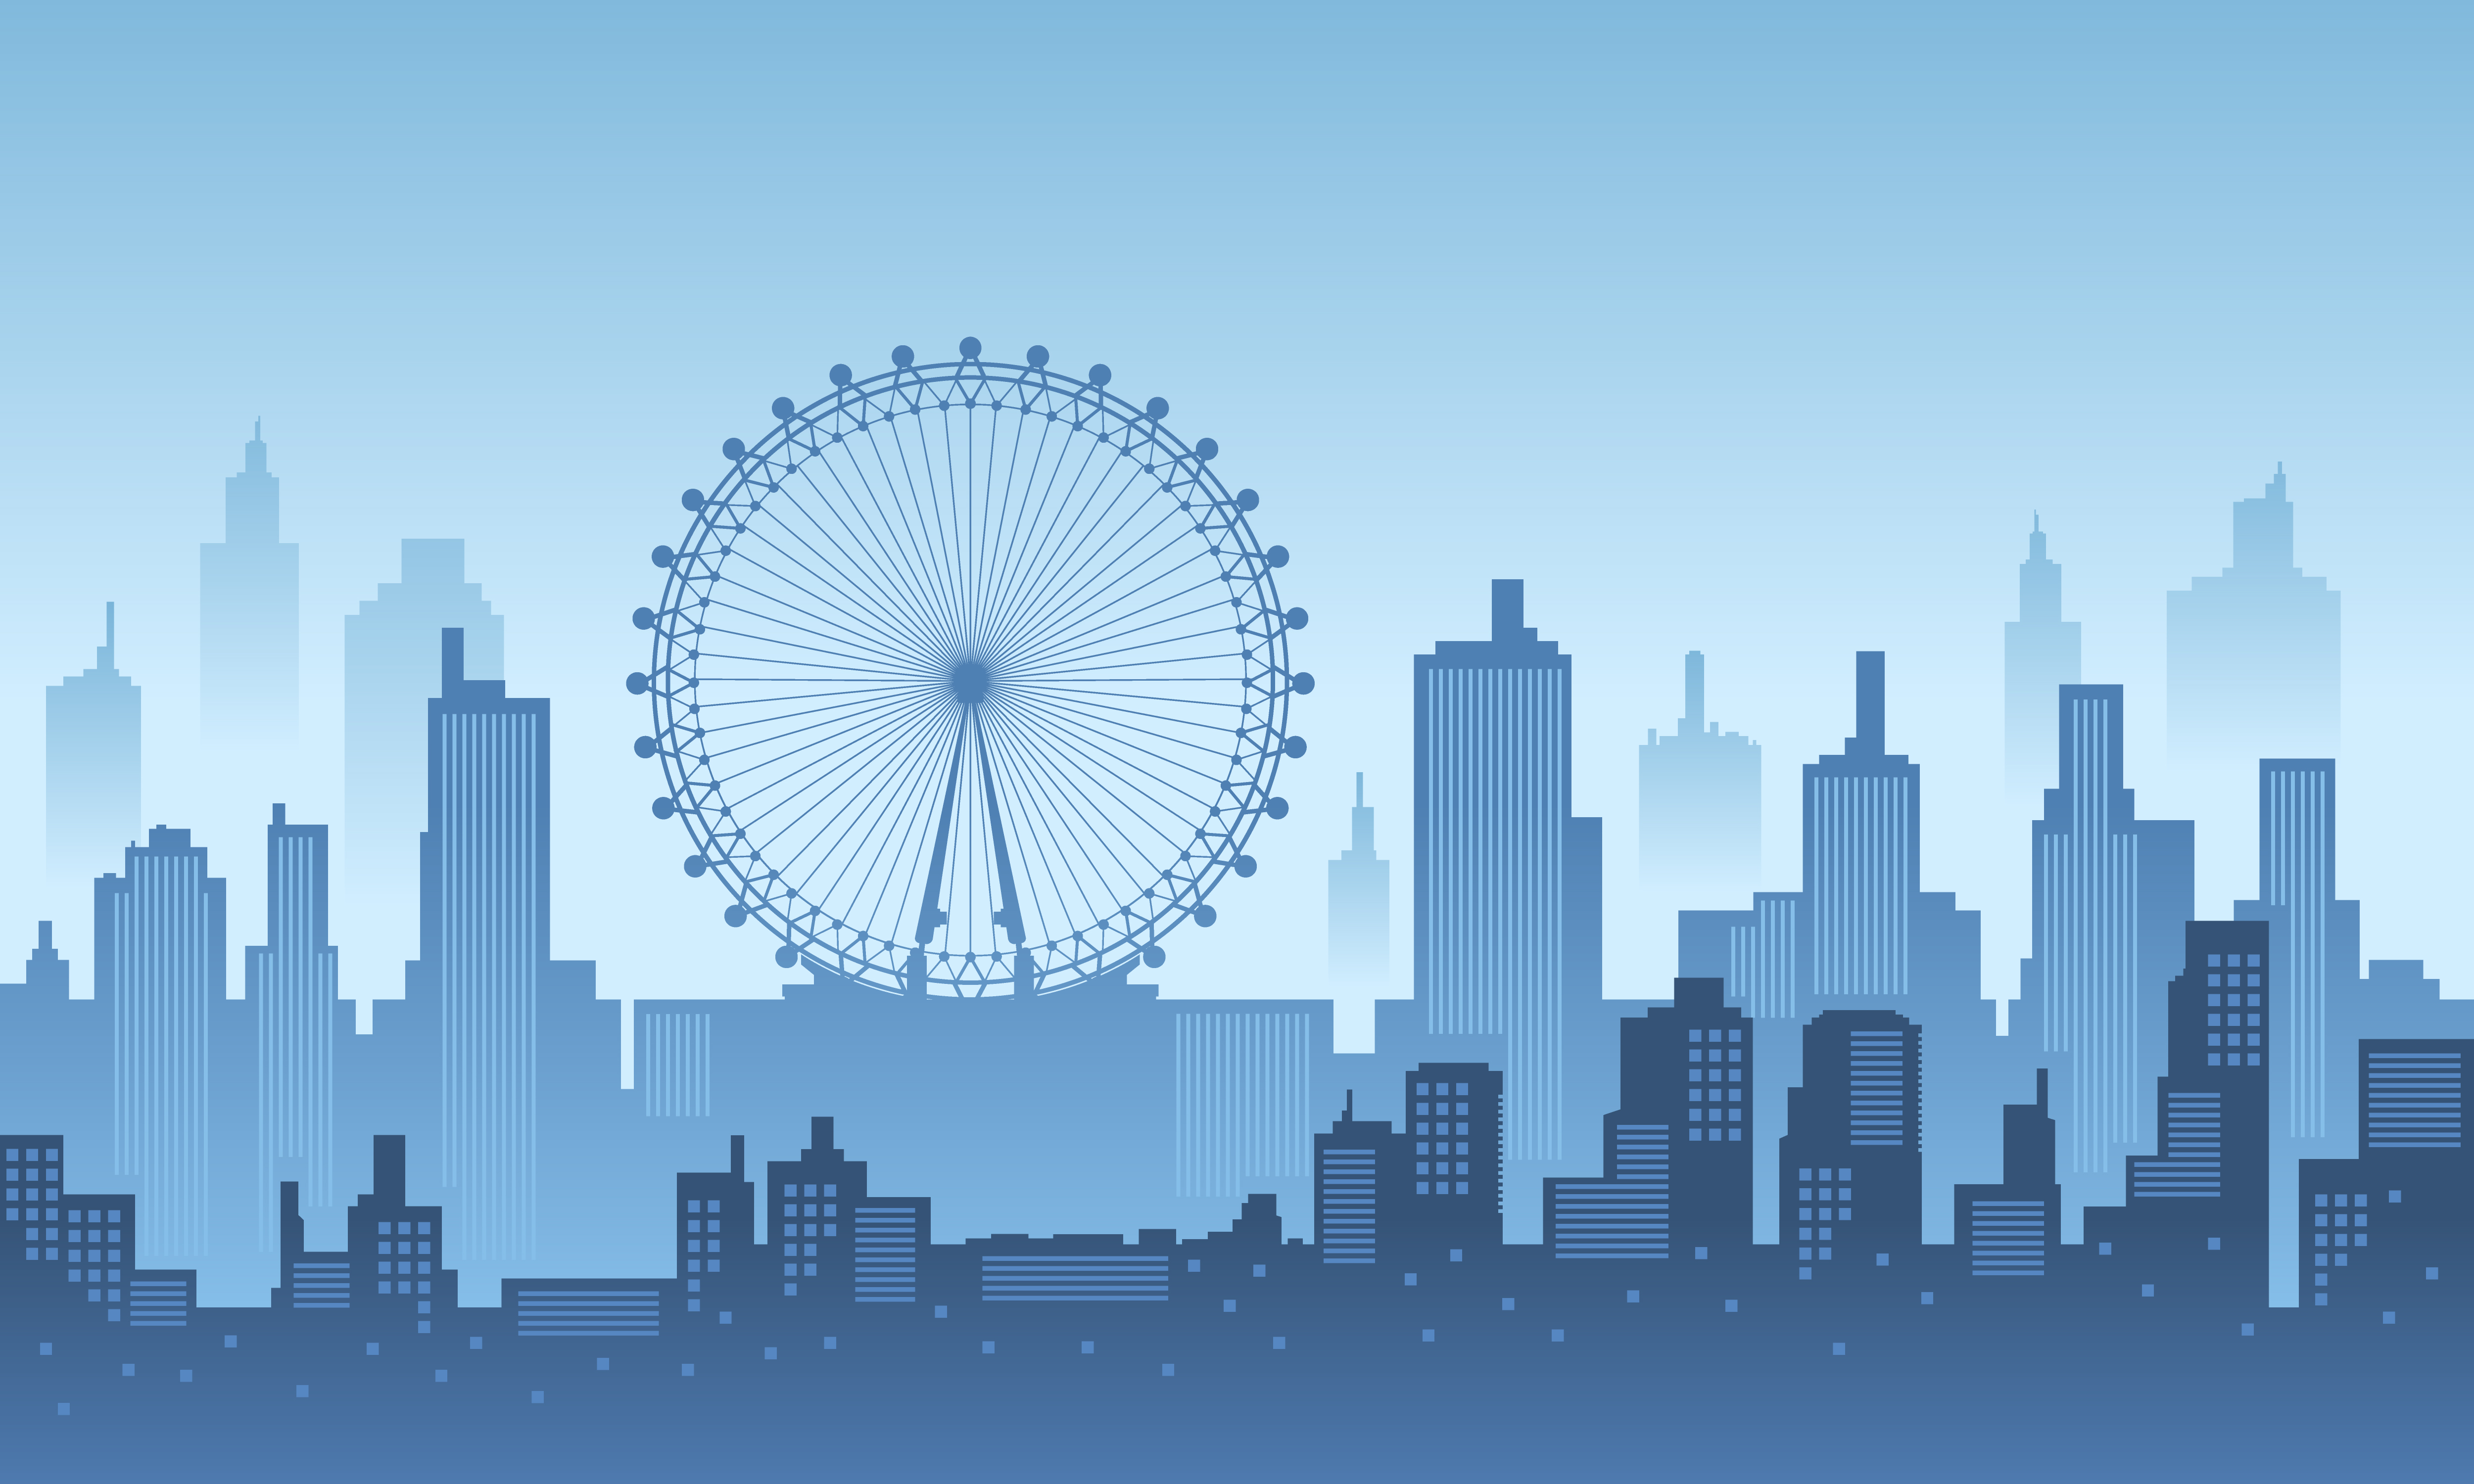 City Silhouette Of London In The Morning Graphic By Cityvector91 Creative Fabrica